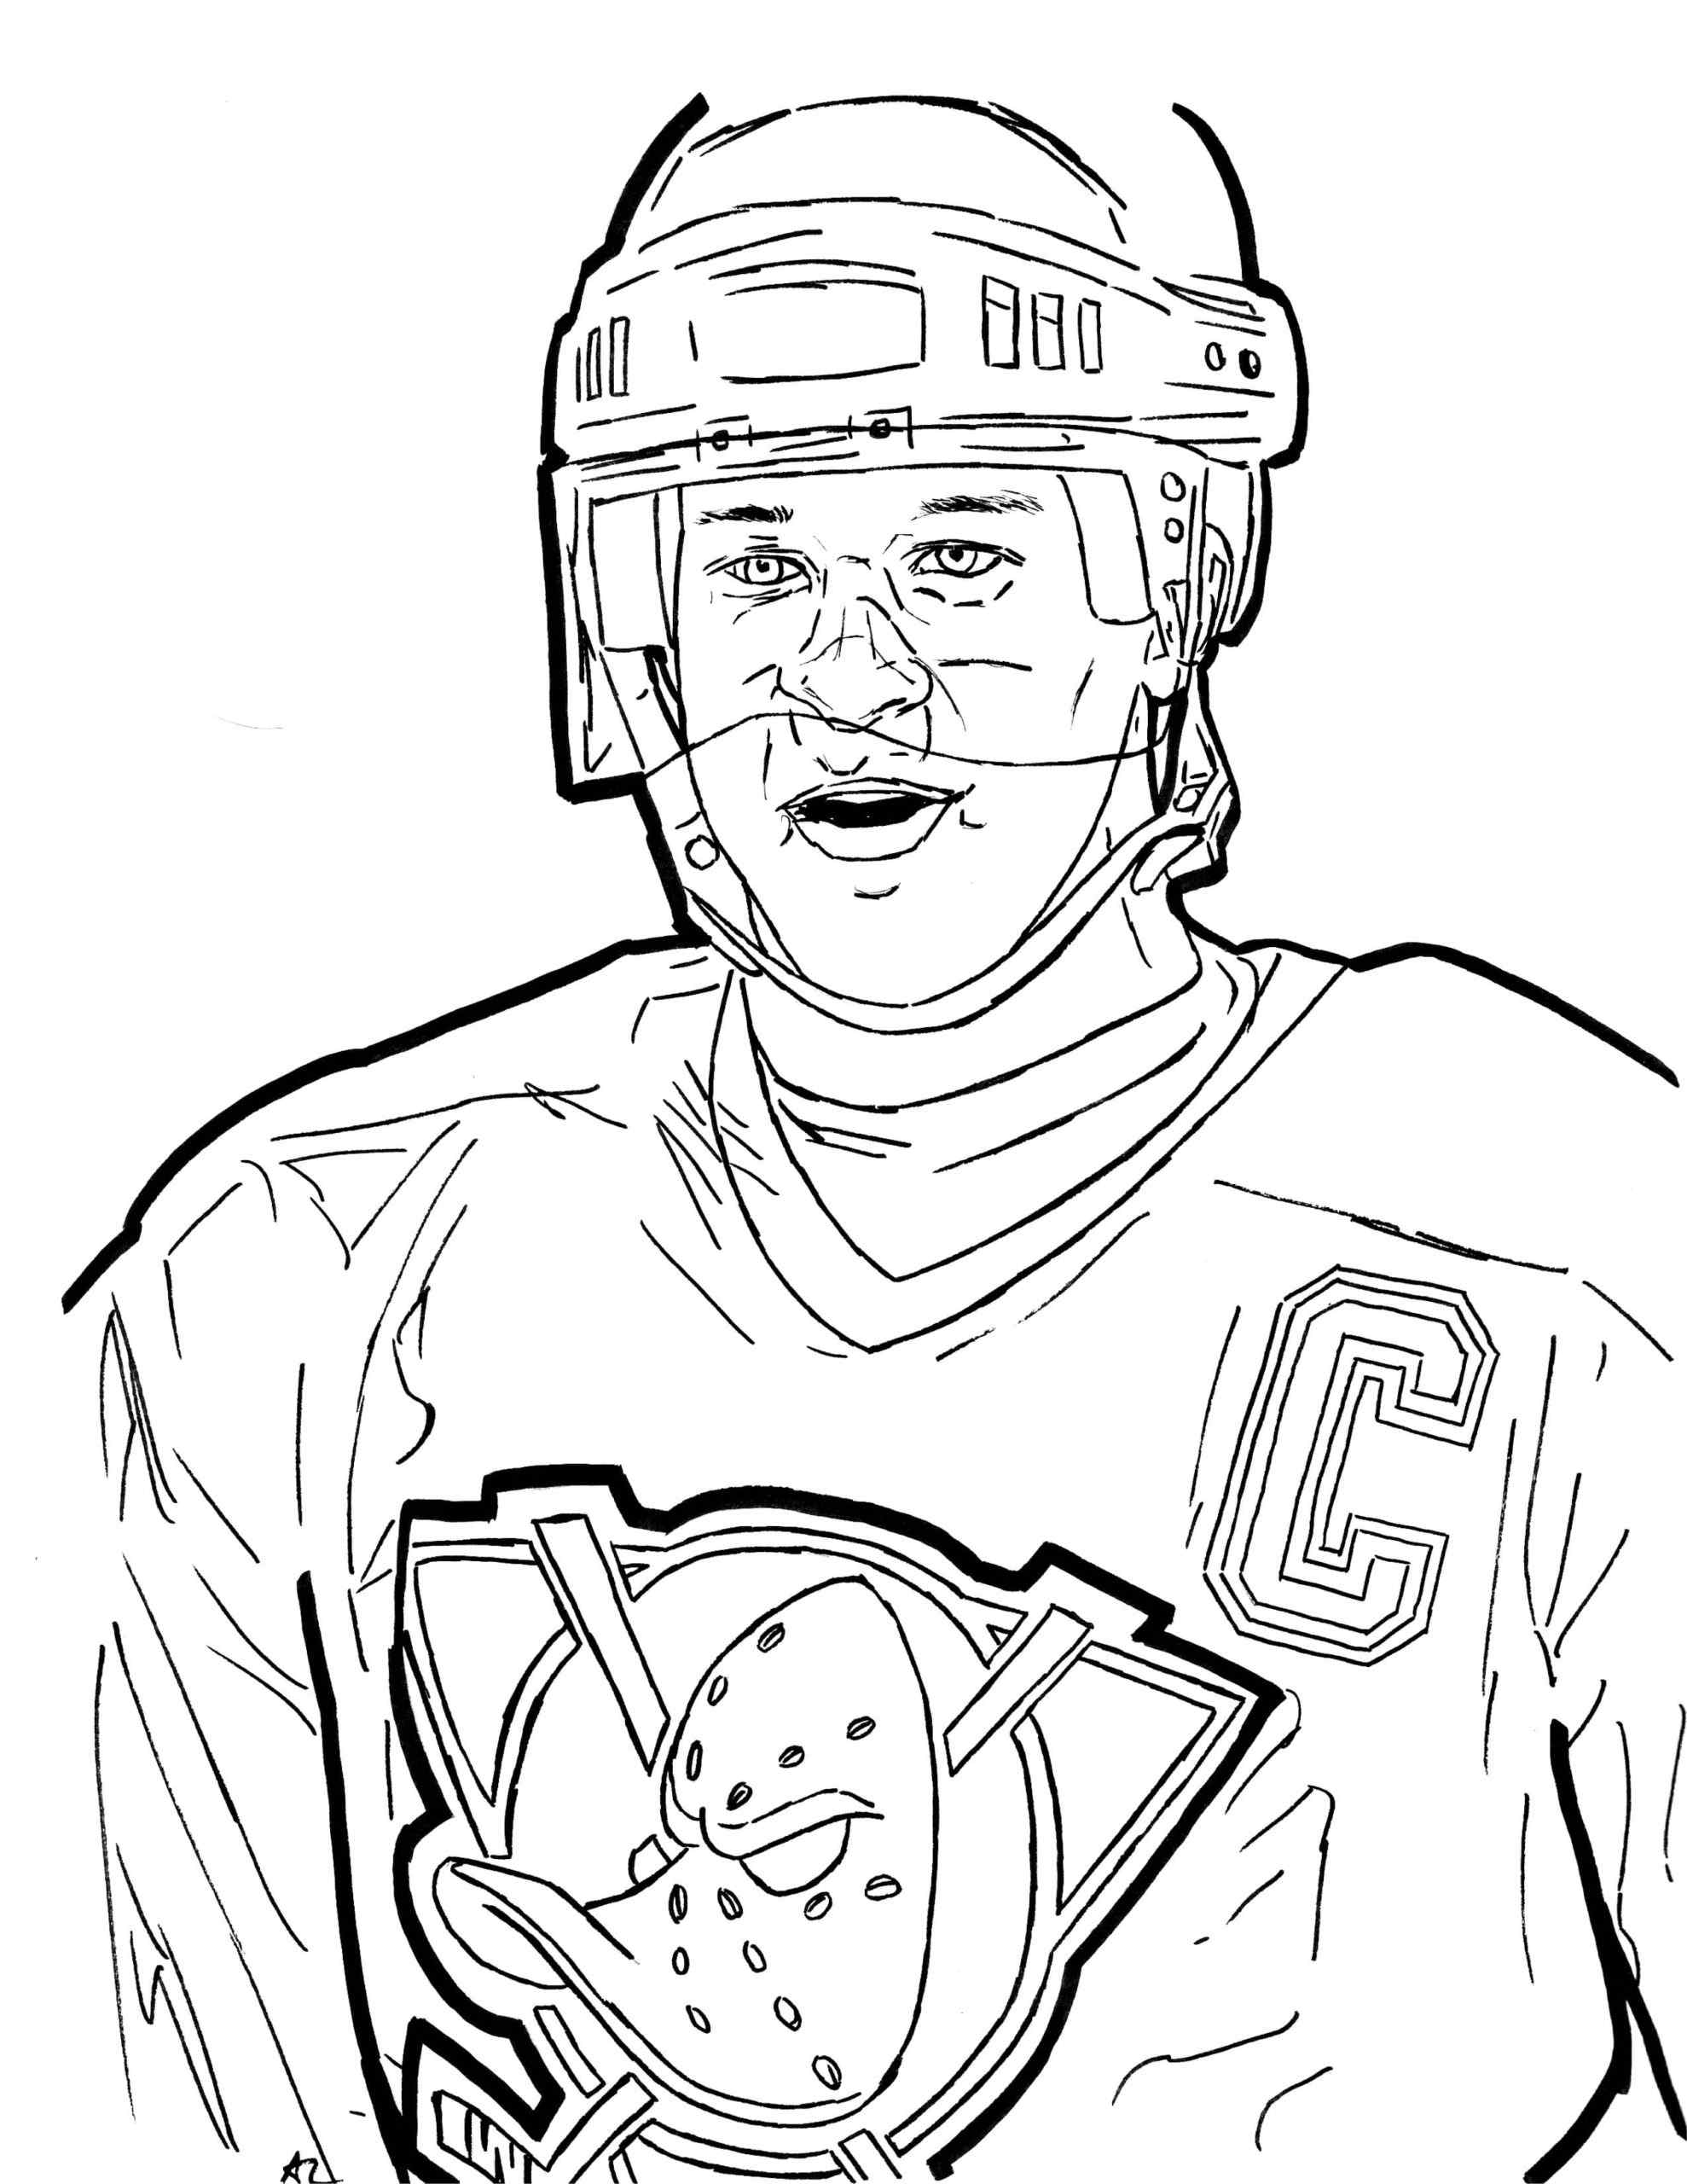 Russian Hockey Player Alexander Ovechkin Coloring Page